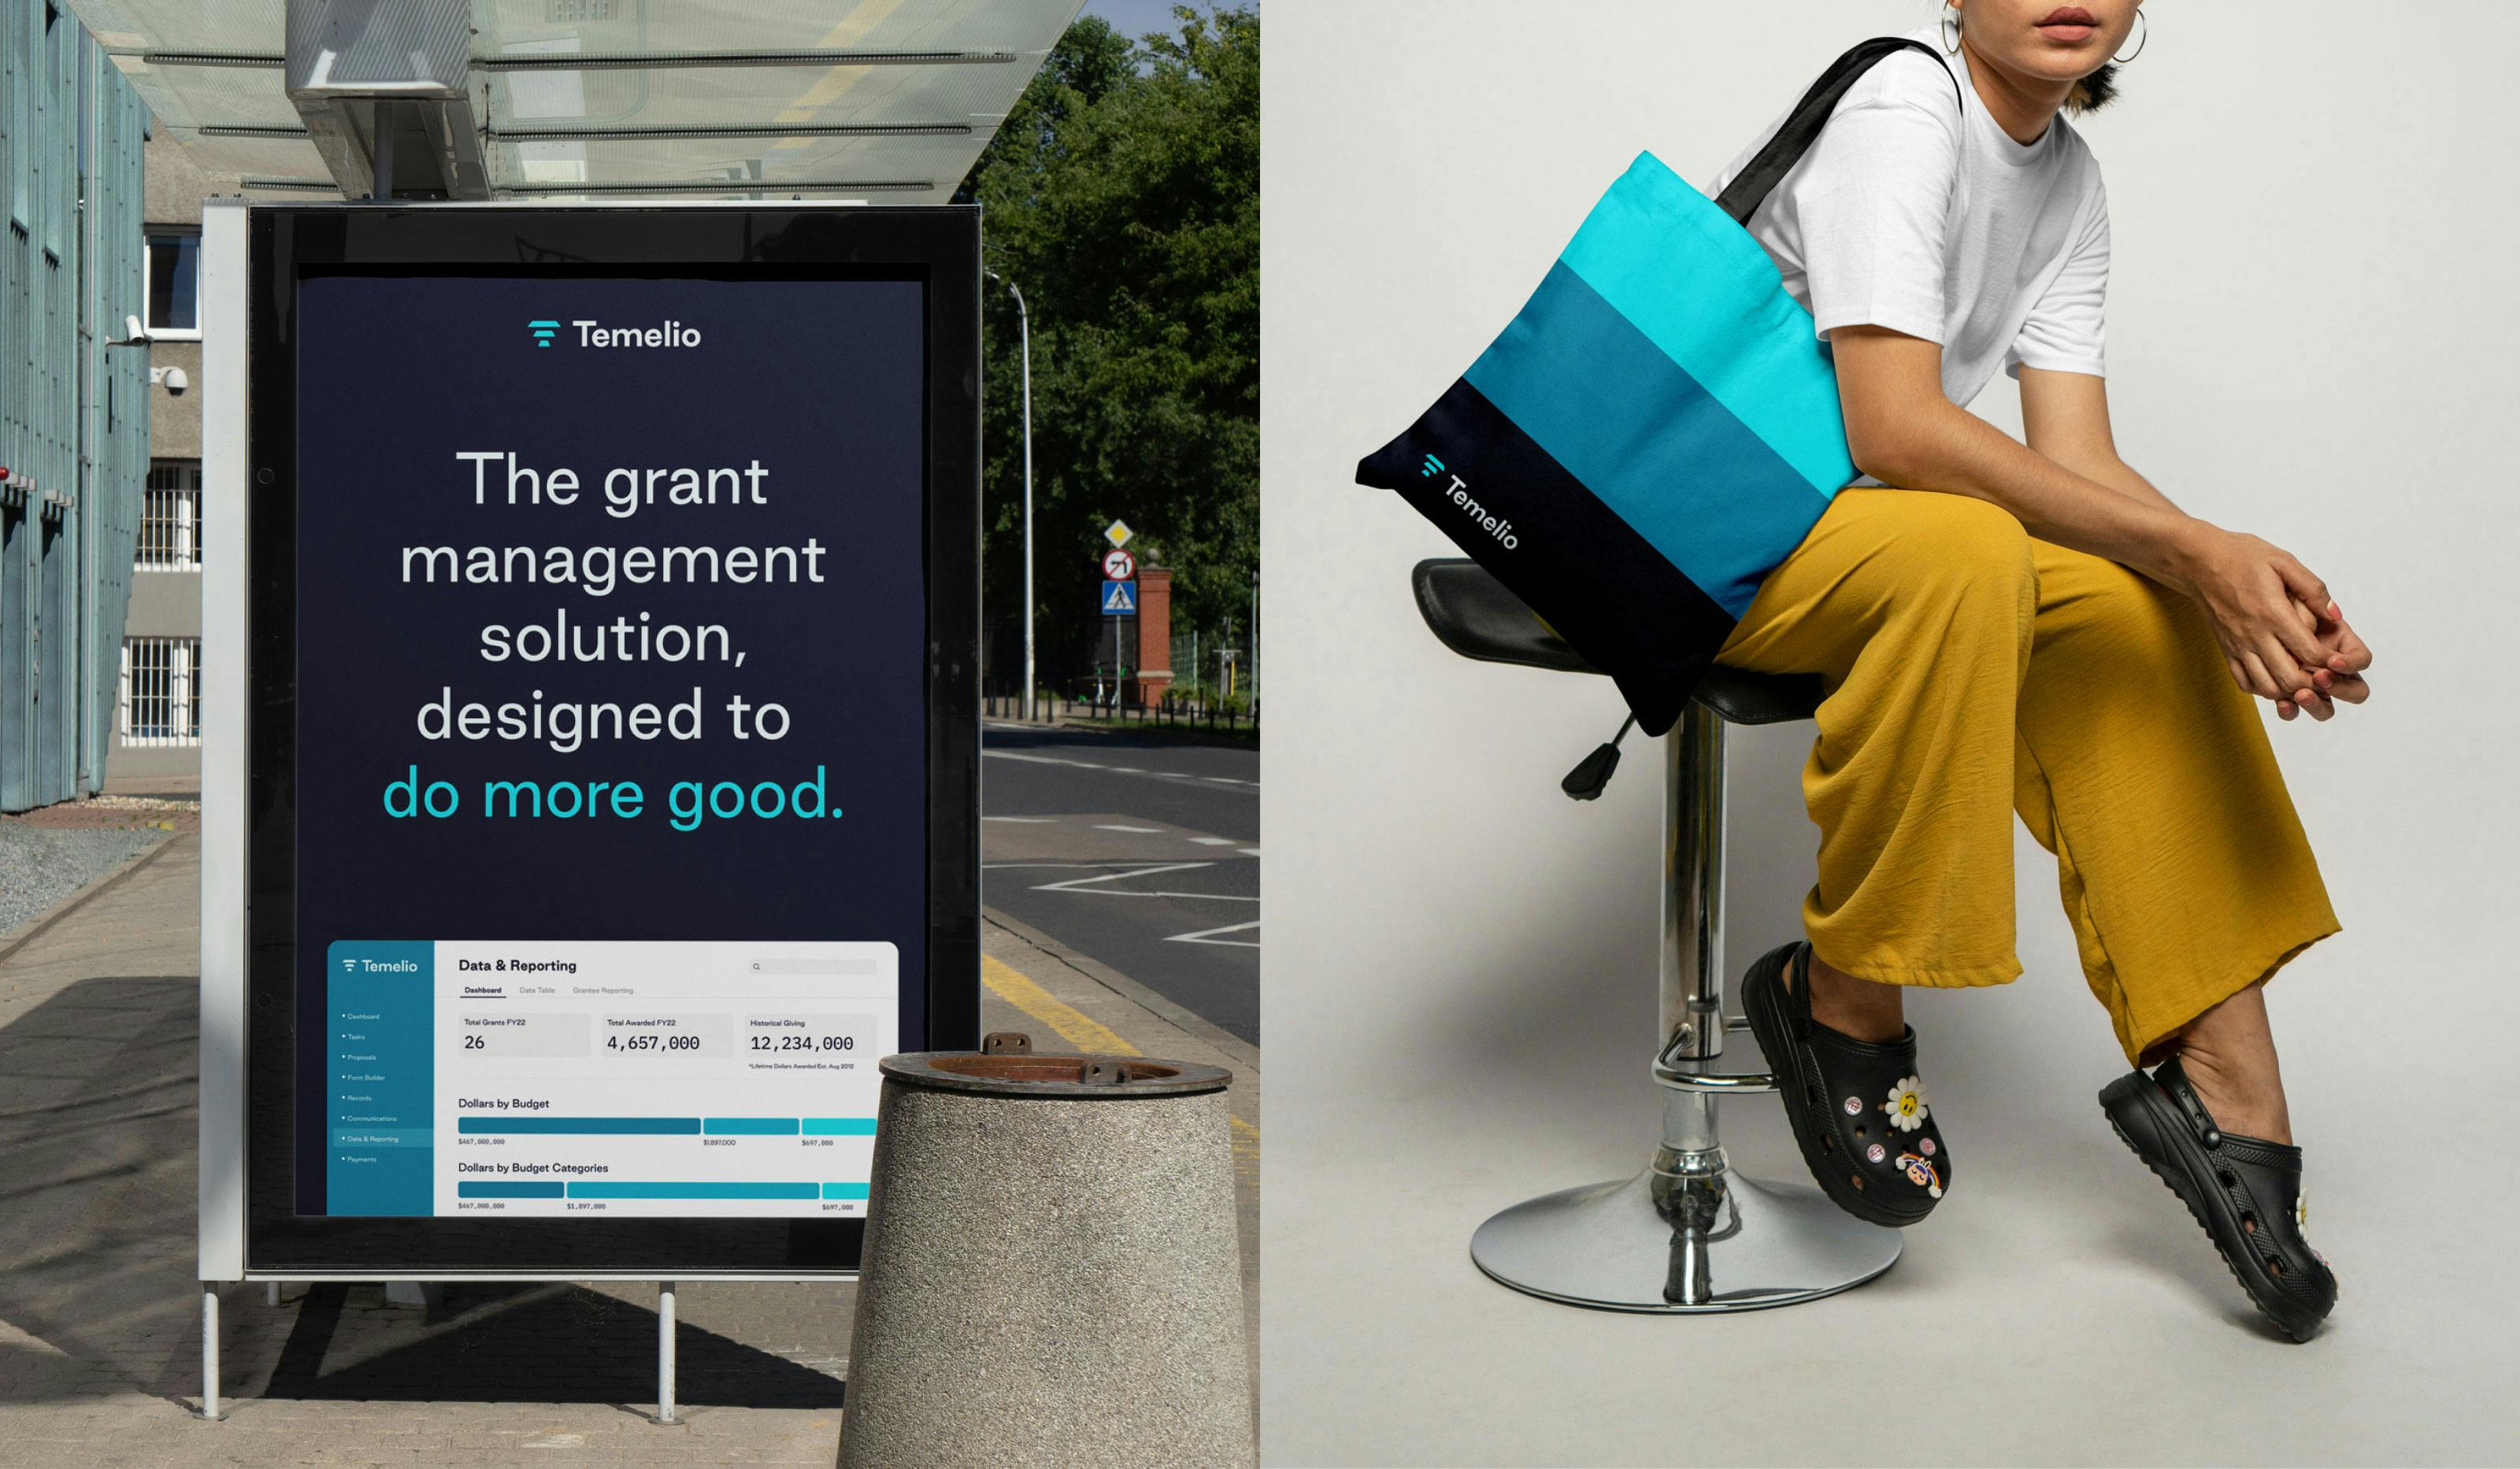 Bus-stop-ad-toe-bag-for-nonprofit.jpg